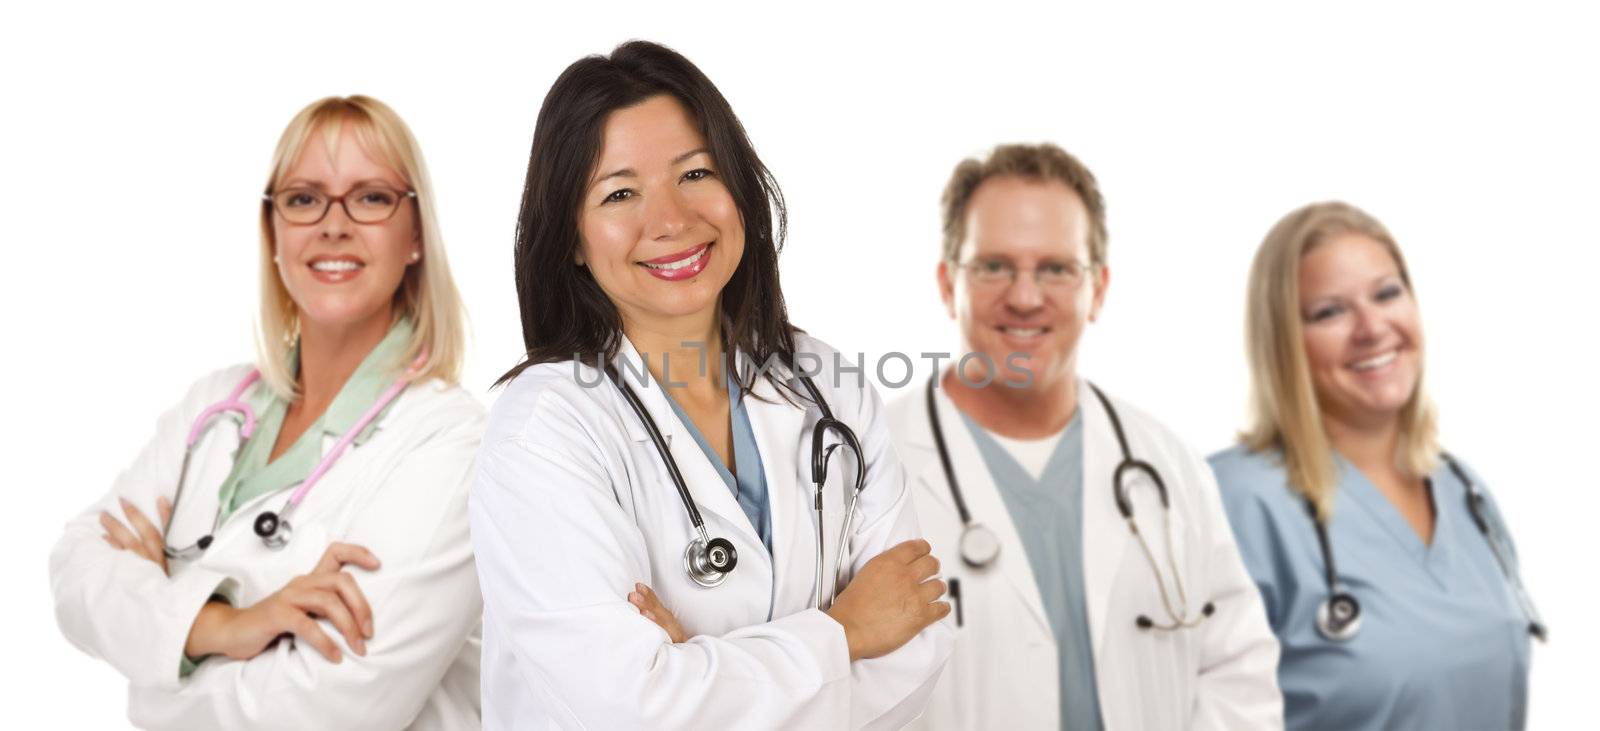 Hispanic Female Doctor and Colleagues by Feverpitched